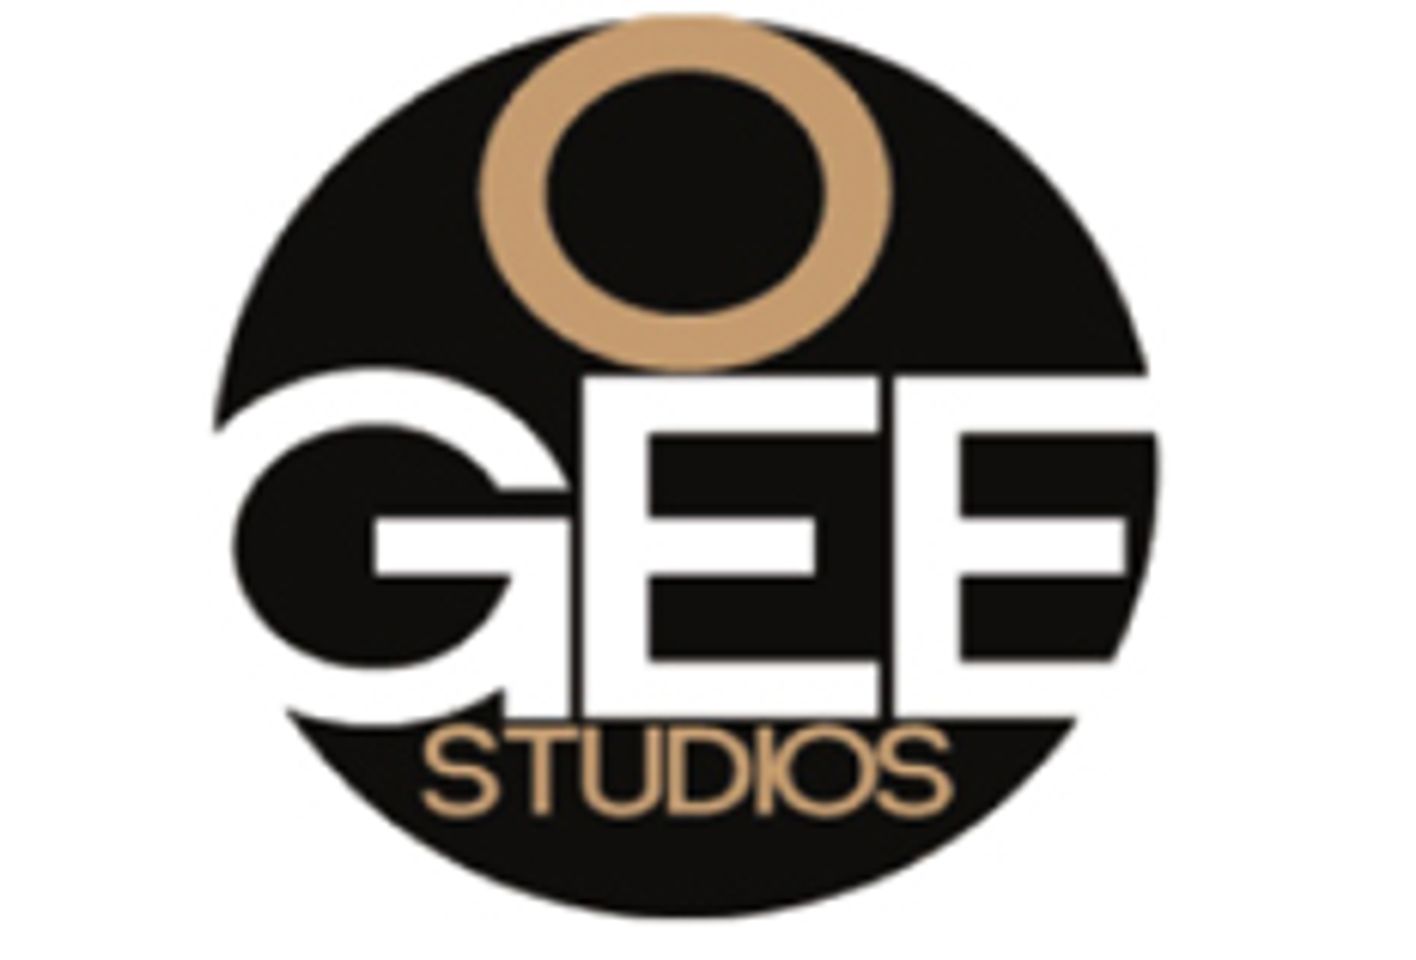 OGEE Studios Starting Strong with Three March Releases